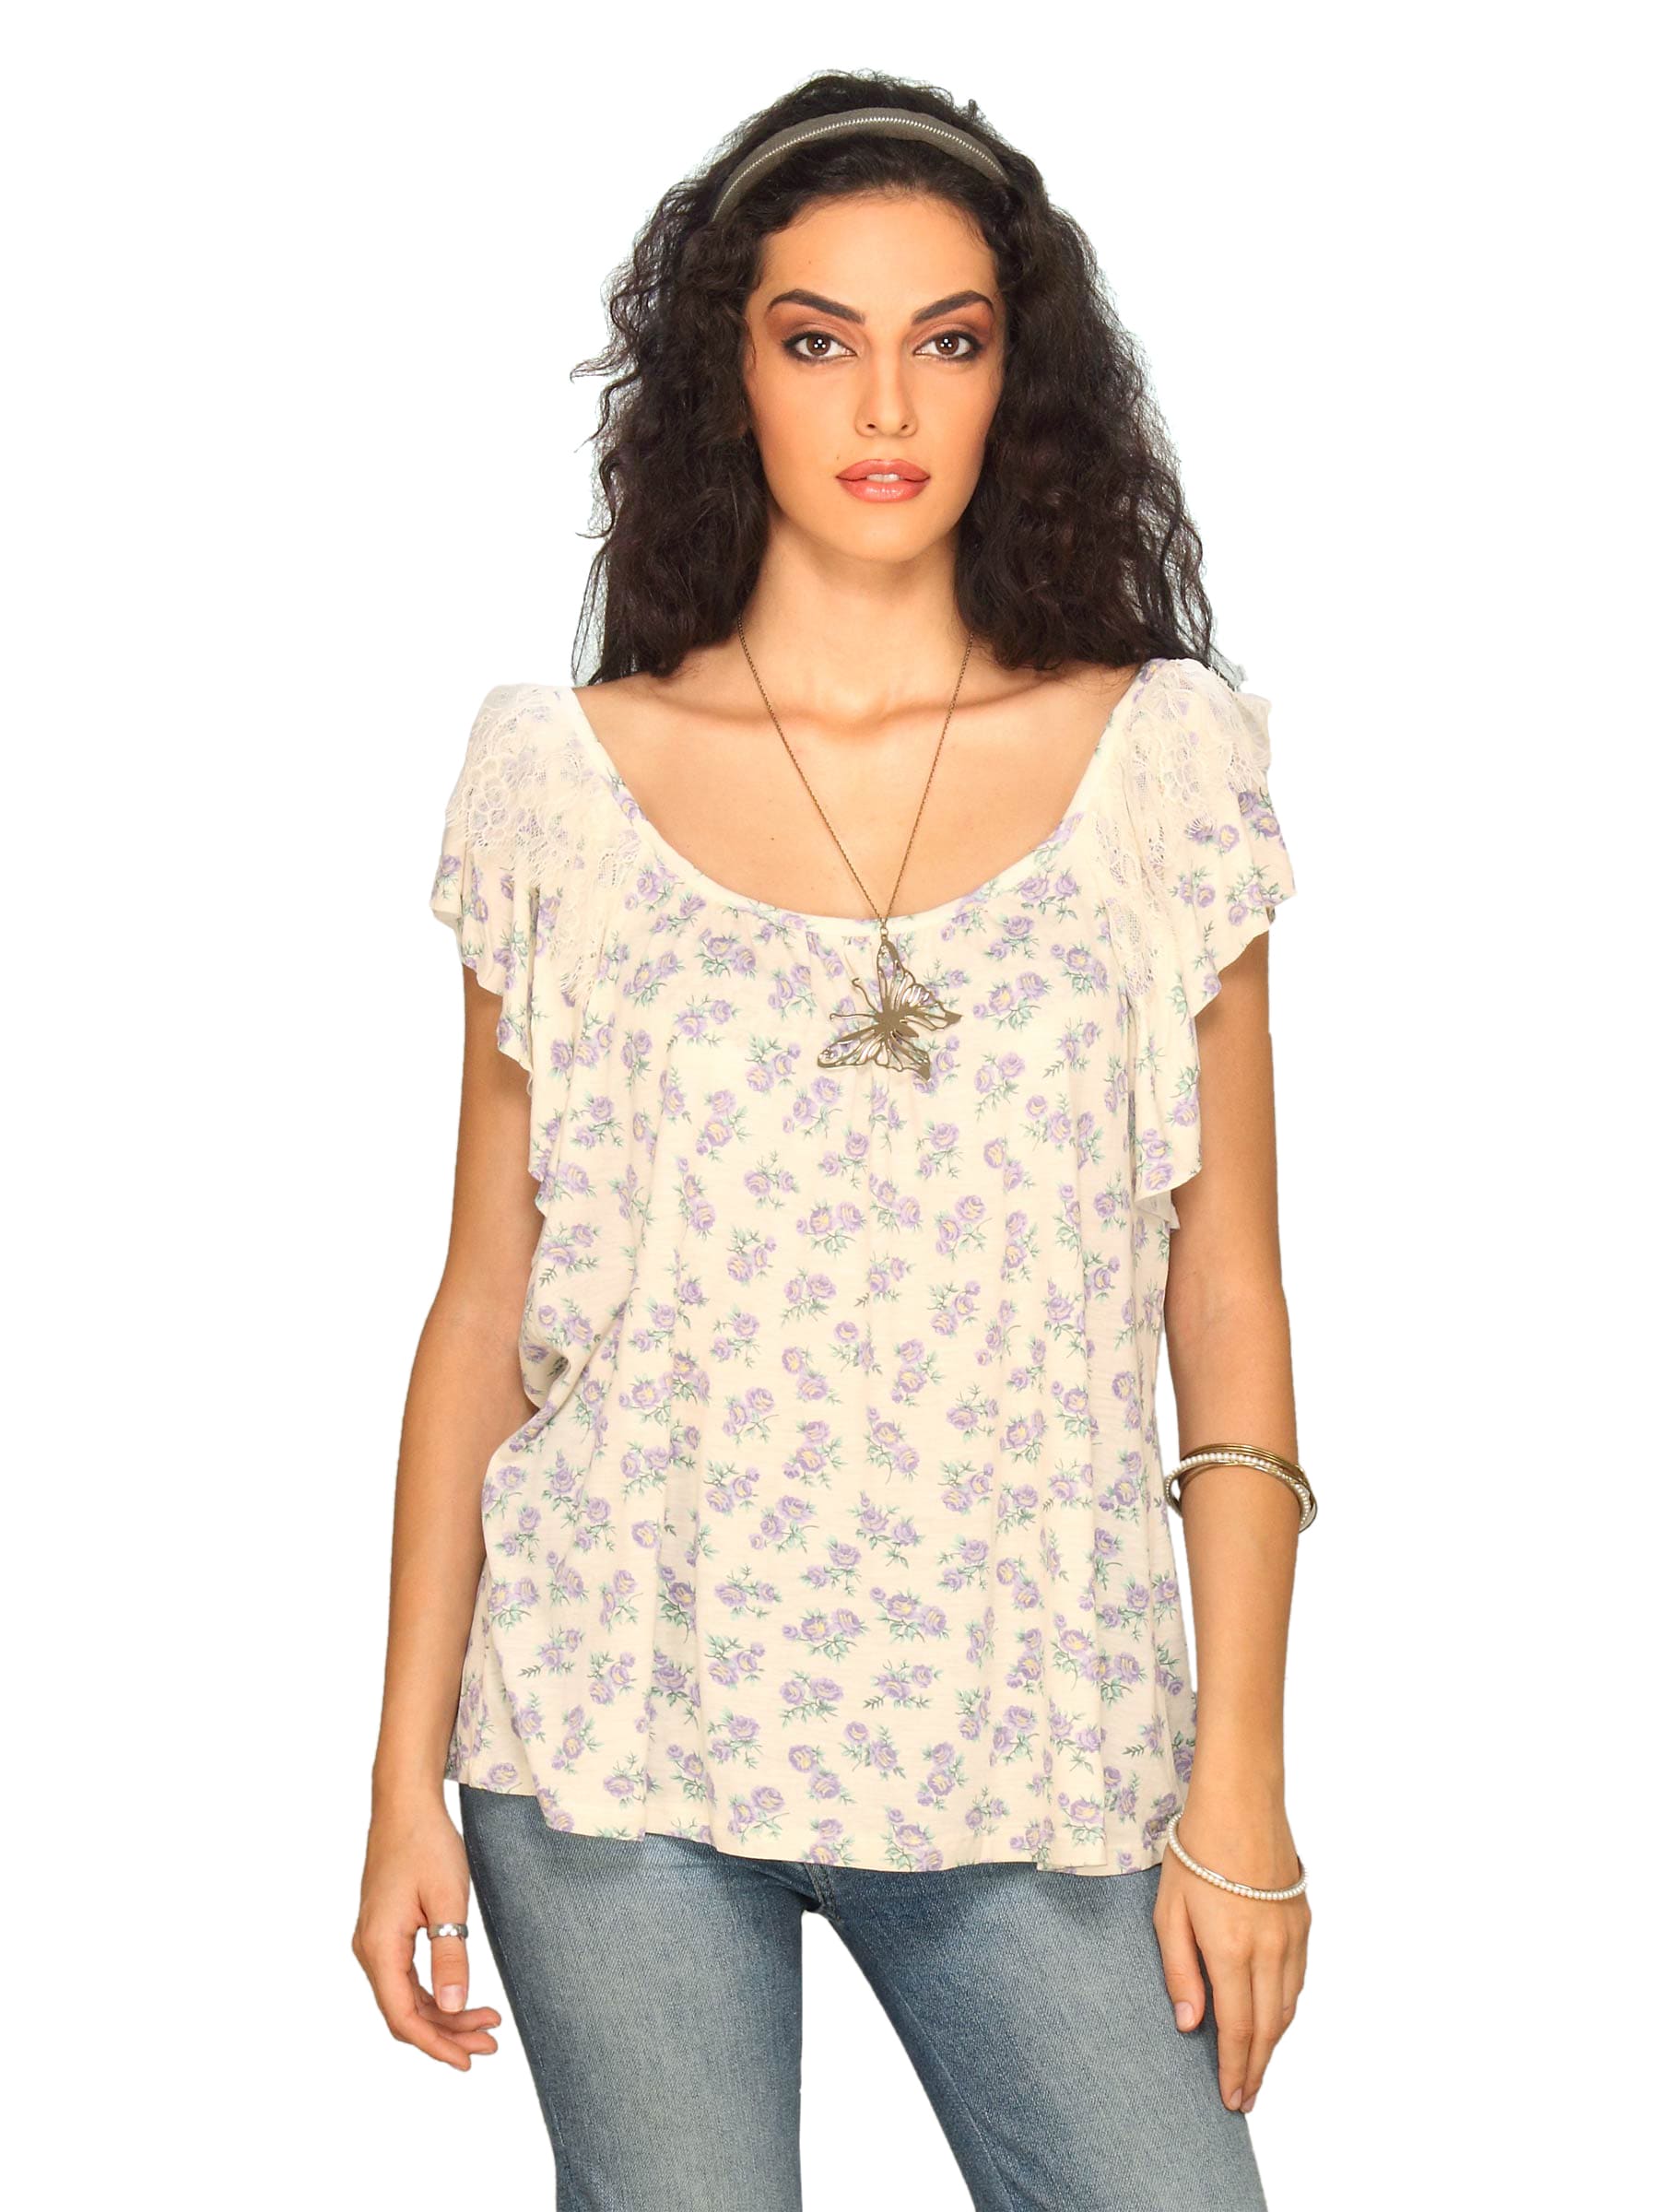 Forever New Women's Cream Floral Print Top